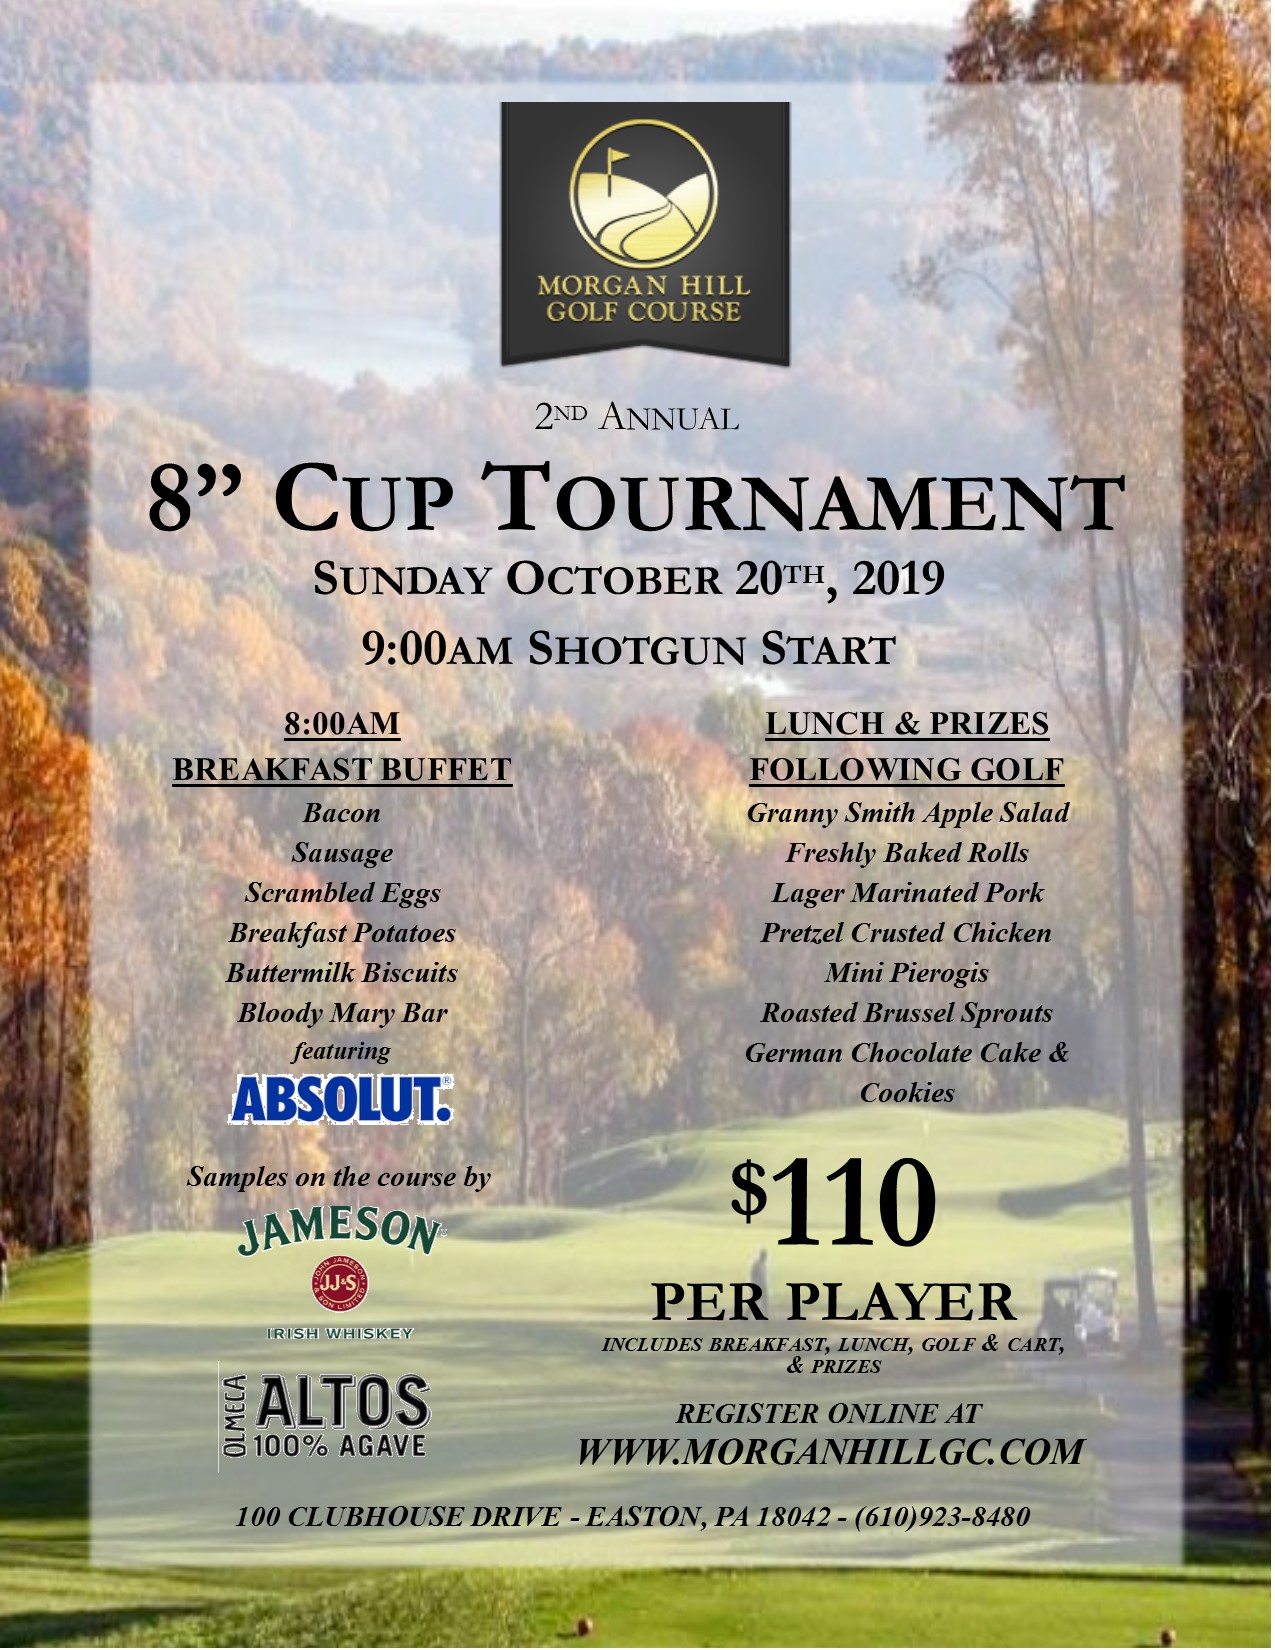 8 cup tournament